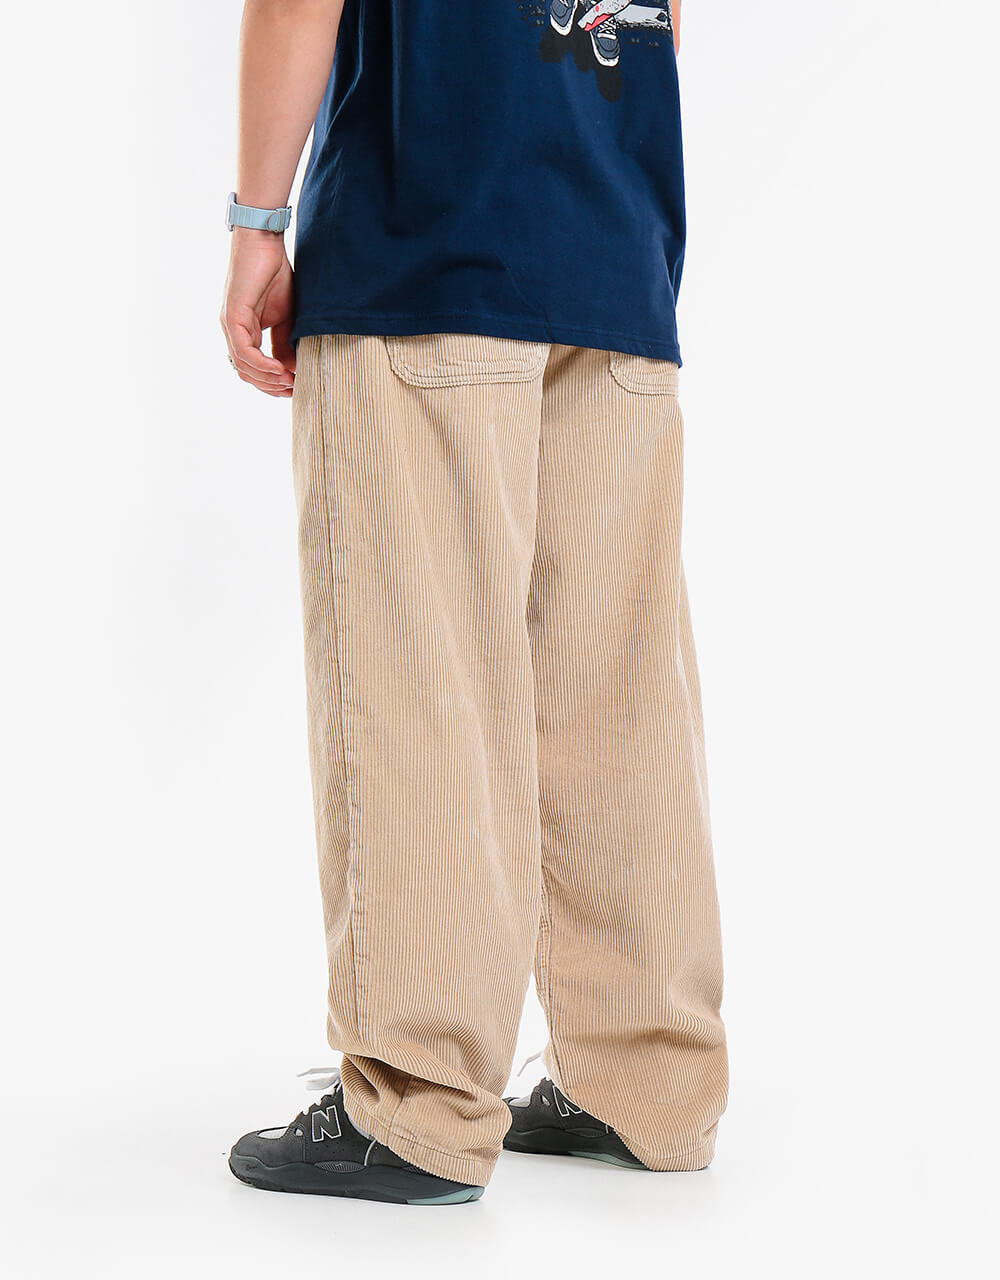 Route One Super Baggy Big Wale Cords - Stone